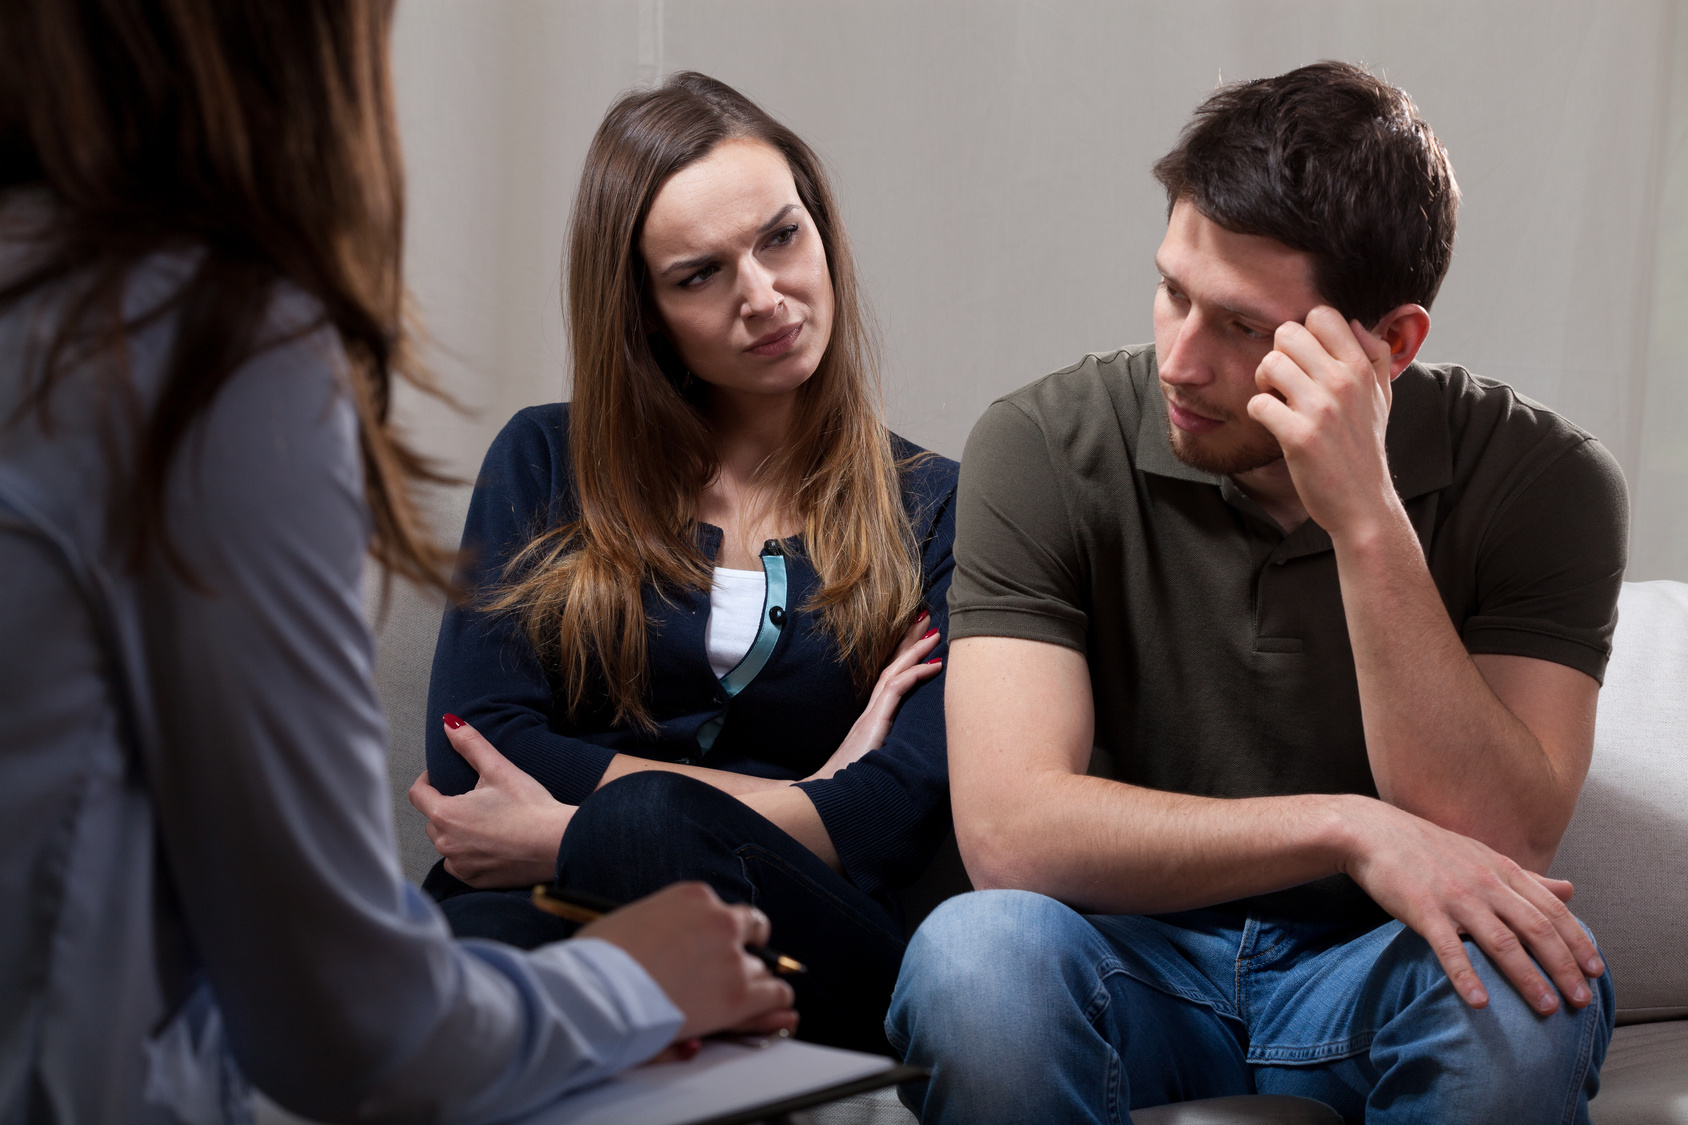 Unhappy at odds couple sitting on psychotherapy session